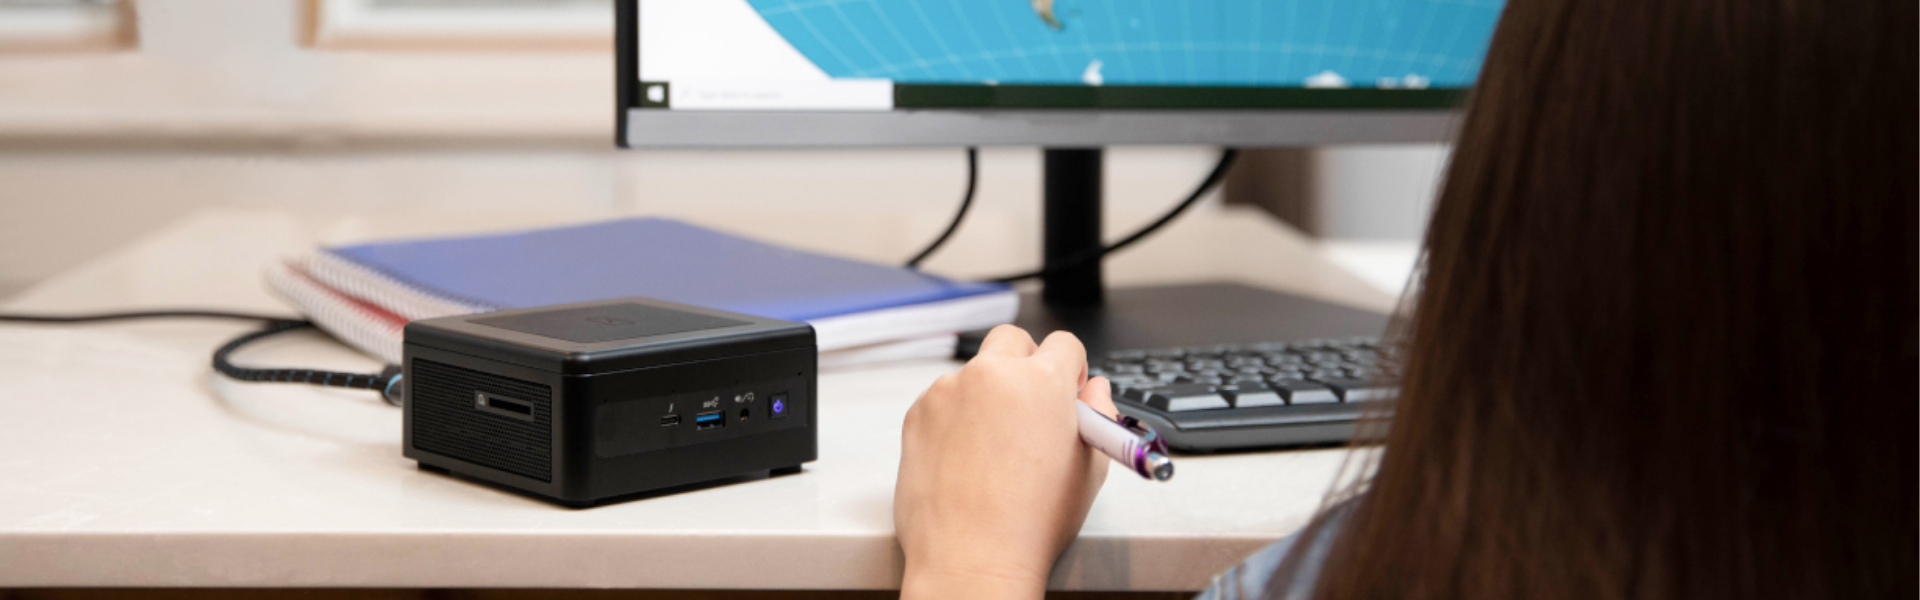 How Mini PCs Are Being Used Within the Education Sector - Simply NUC - mini pcs in education - pc for the classroom - pc for Lecture Halls - mini pc for Libraries mini pc for Labs